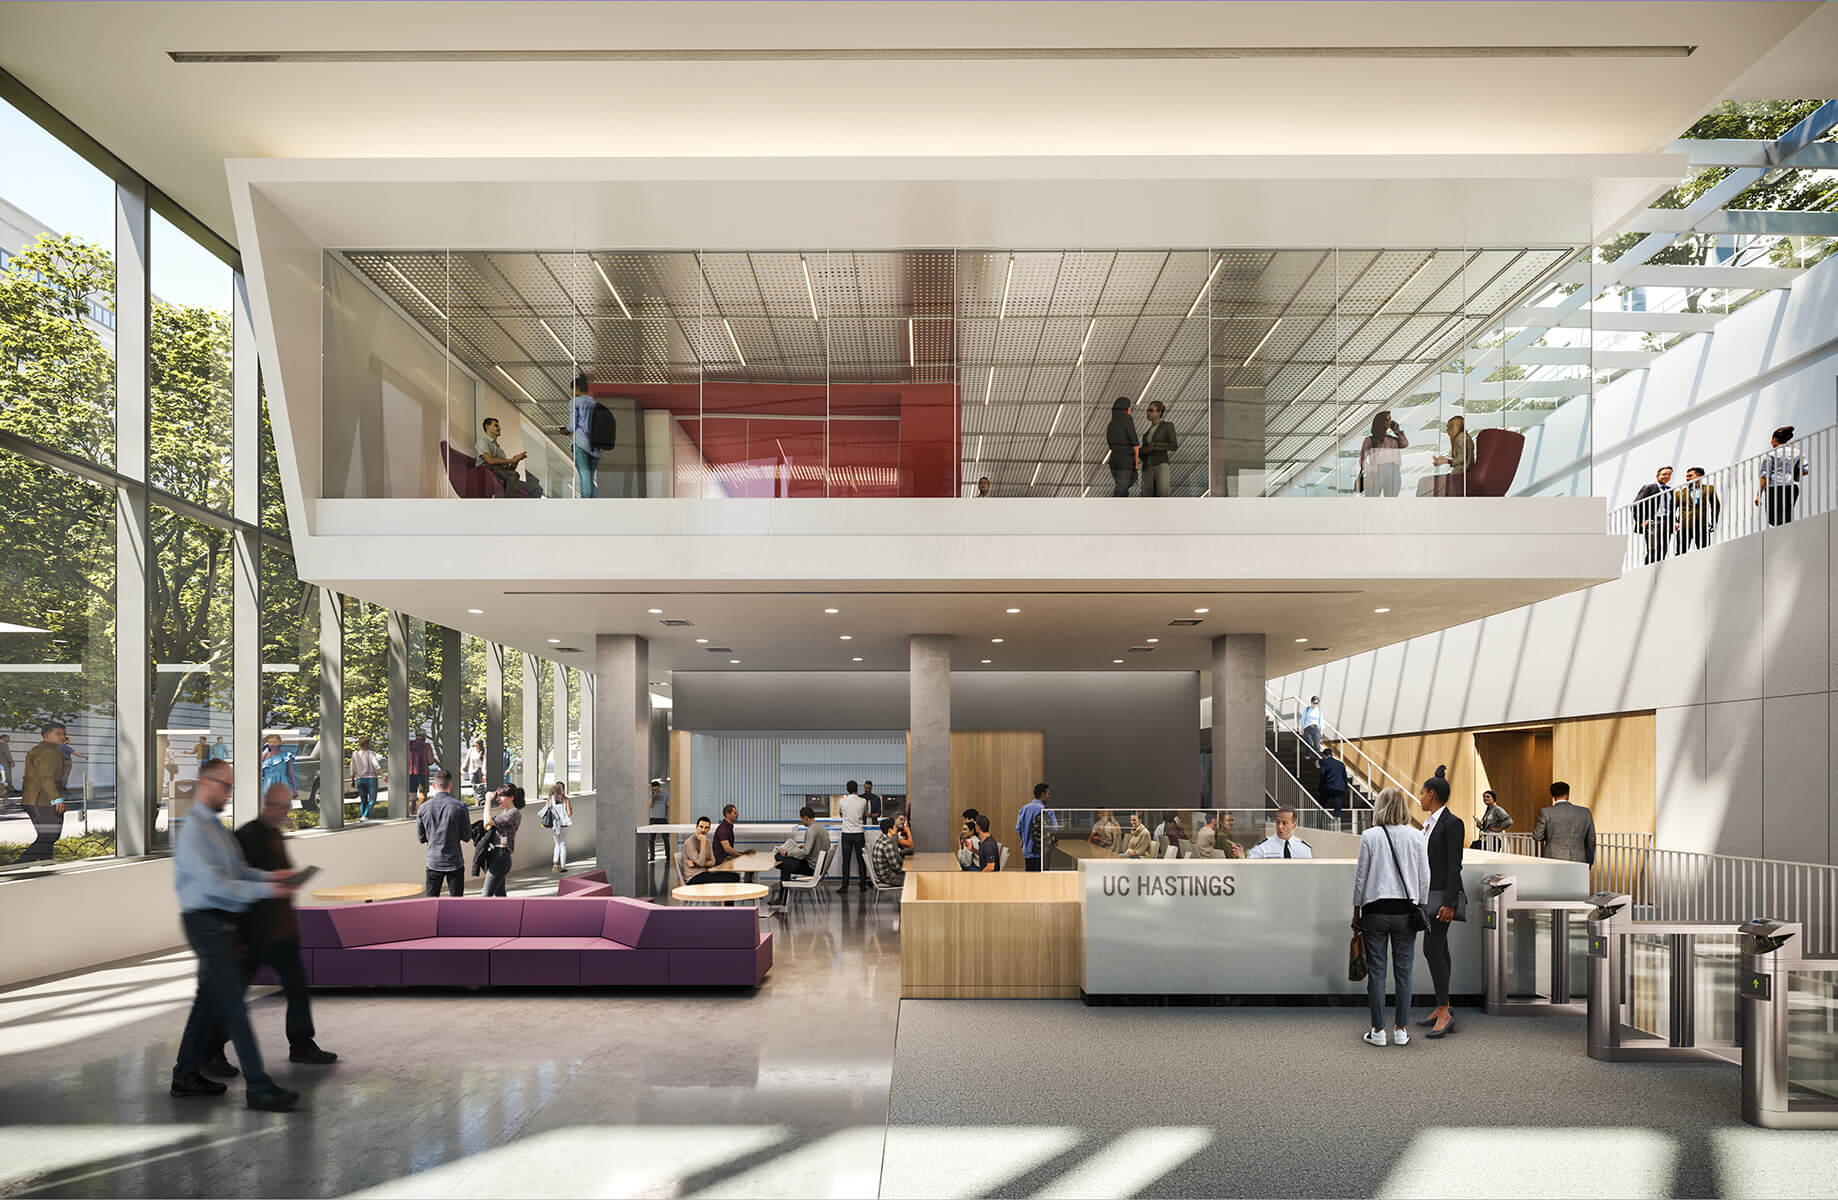 An image of the proposed interior of the 198 McAllister project with a mix of public, academic, and resident spaces.